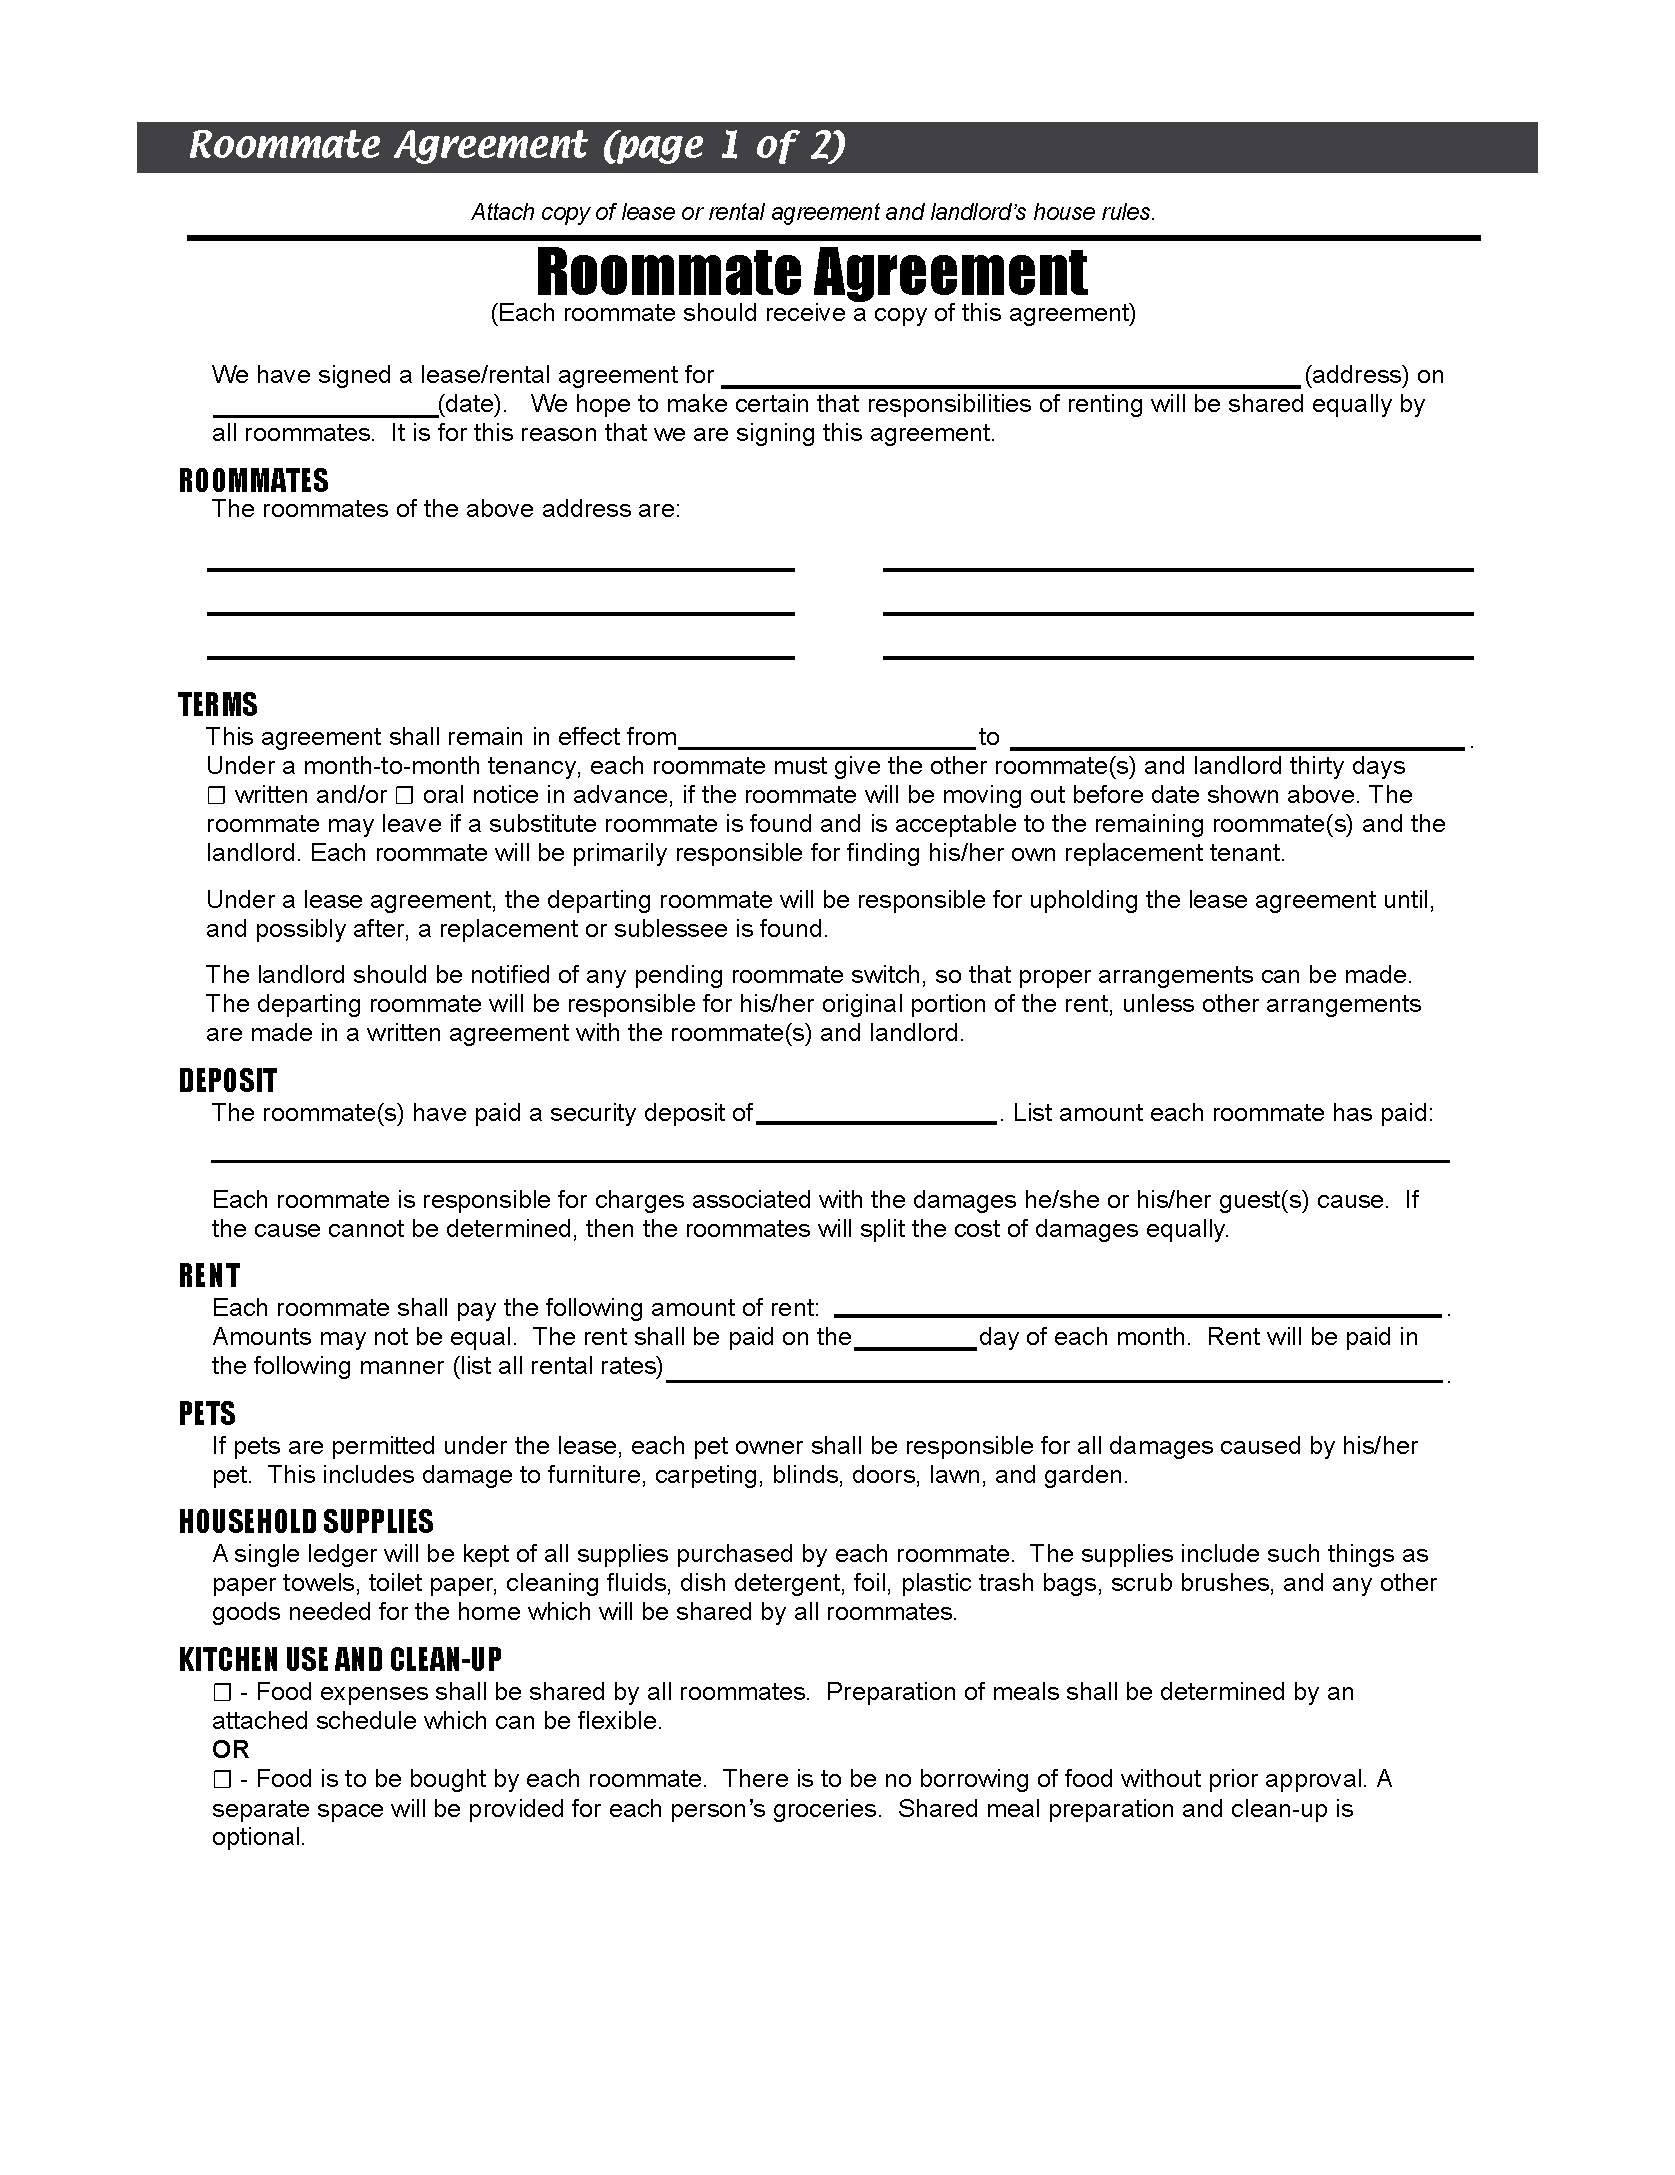 Free Michigan Roommate Agreement  PDF With Regard To commercial kitchen rental agreement template